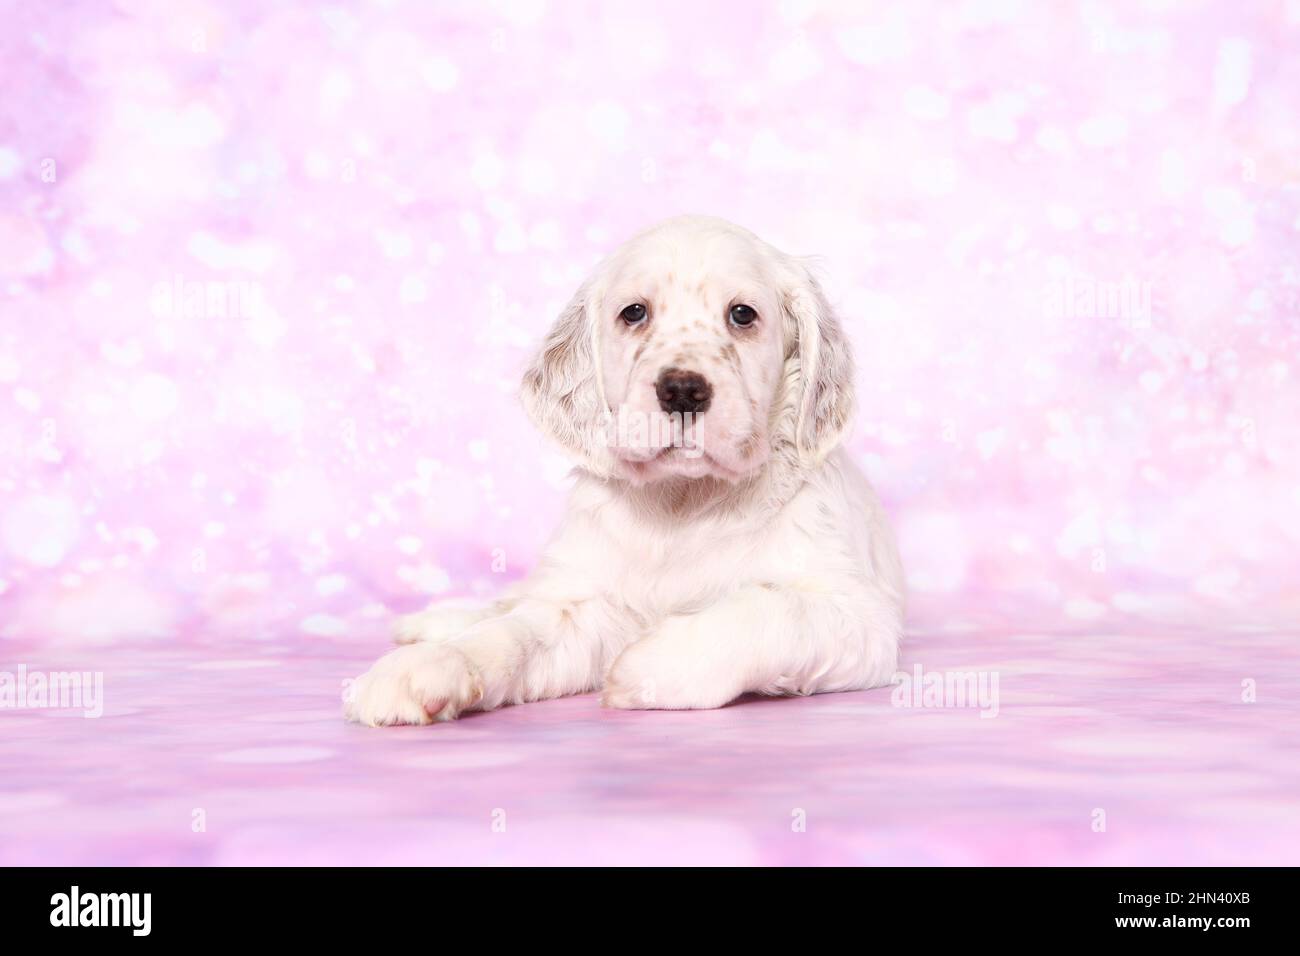 English Setter. Puppy lying, seen against a pink background. Germany Stock Photo